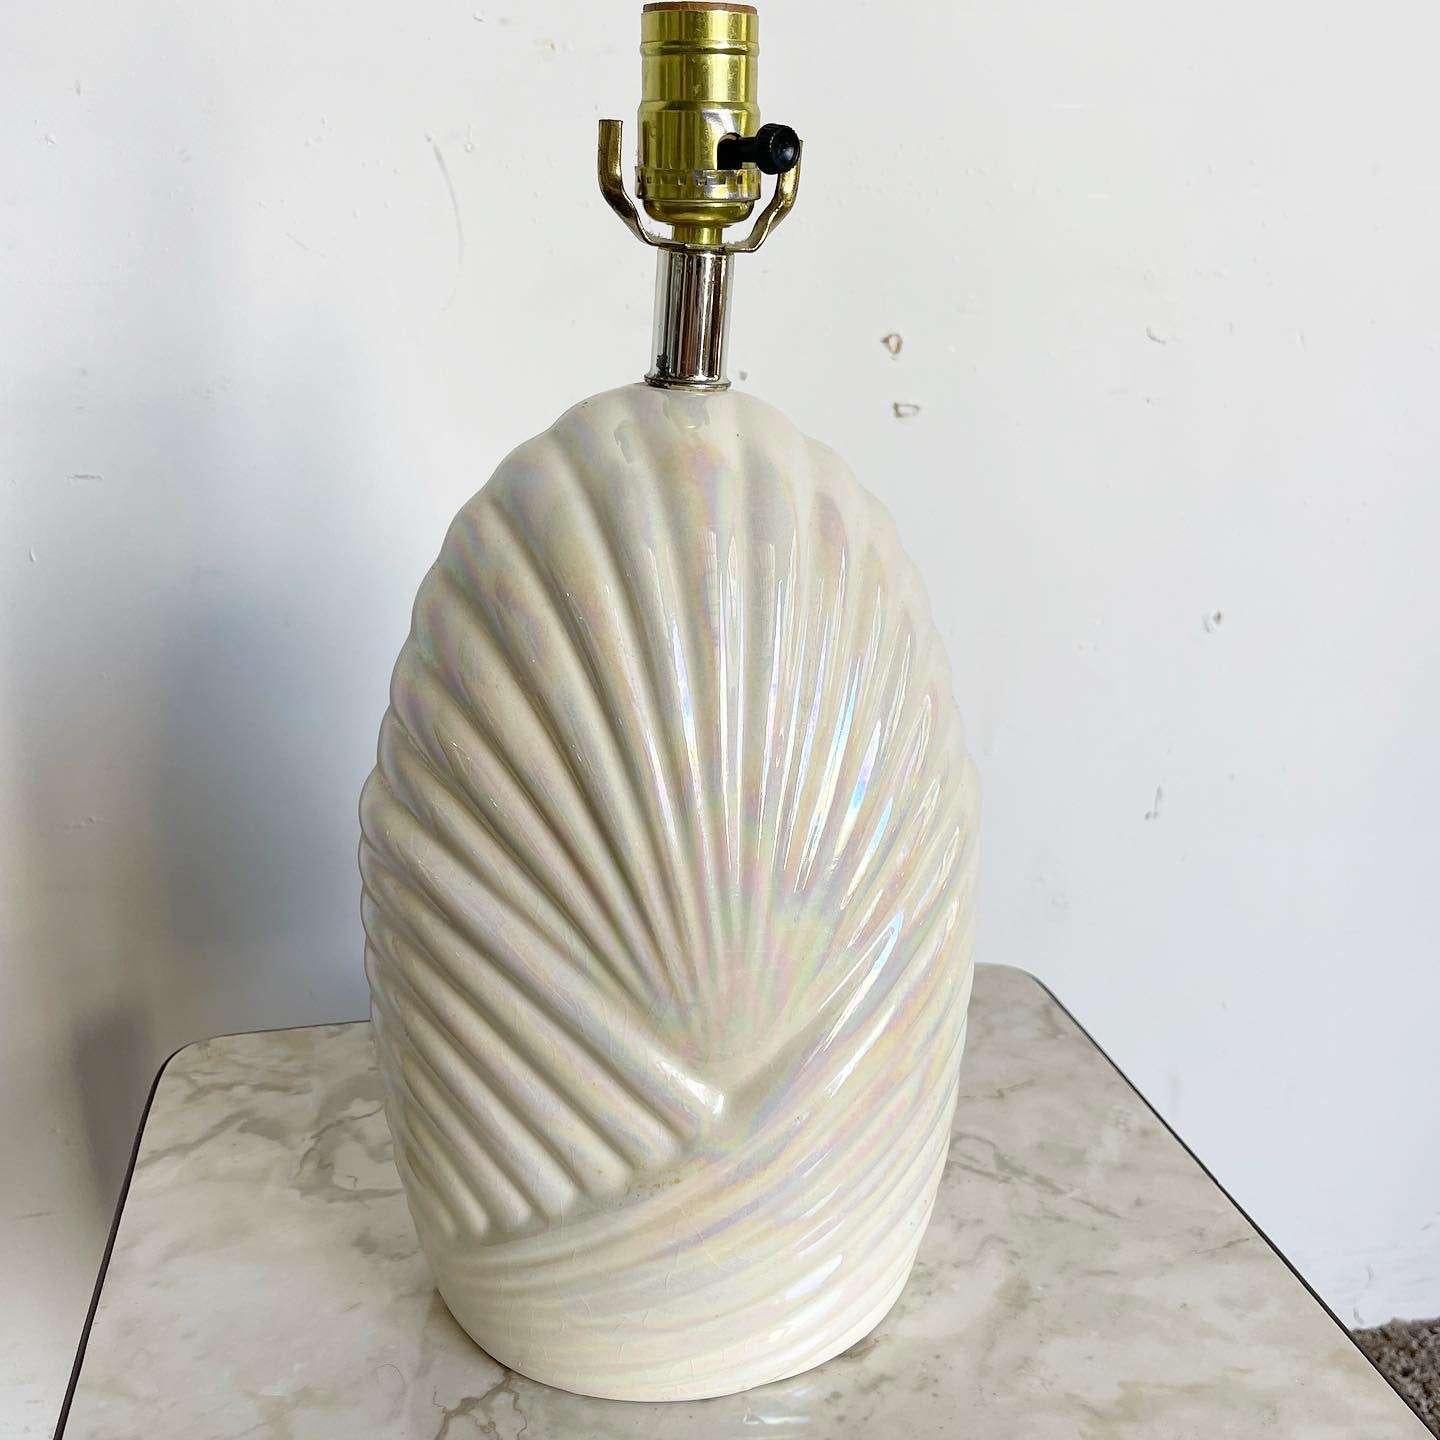 Illuminate your space with the captivating charm of this amazing vintage postmodern ceramic table lamp. The lamp showcases a scalloped body with an off-white iridescent finish, exuding a unique and mesmerizing aesthetic. With its blend of vintage